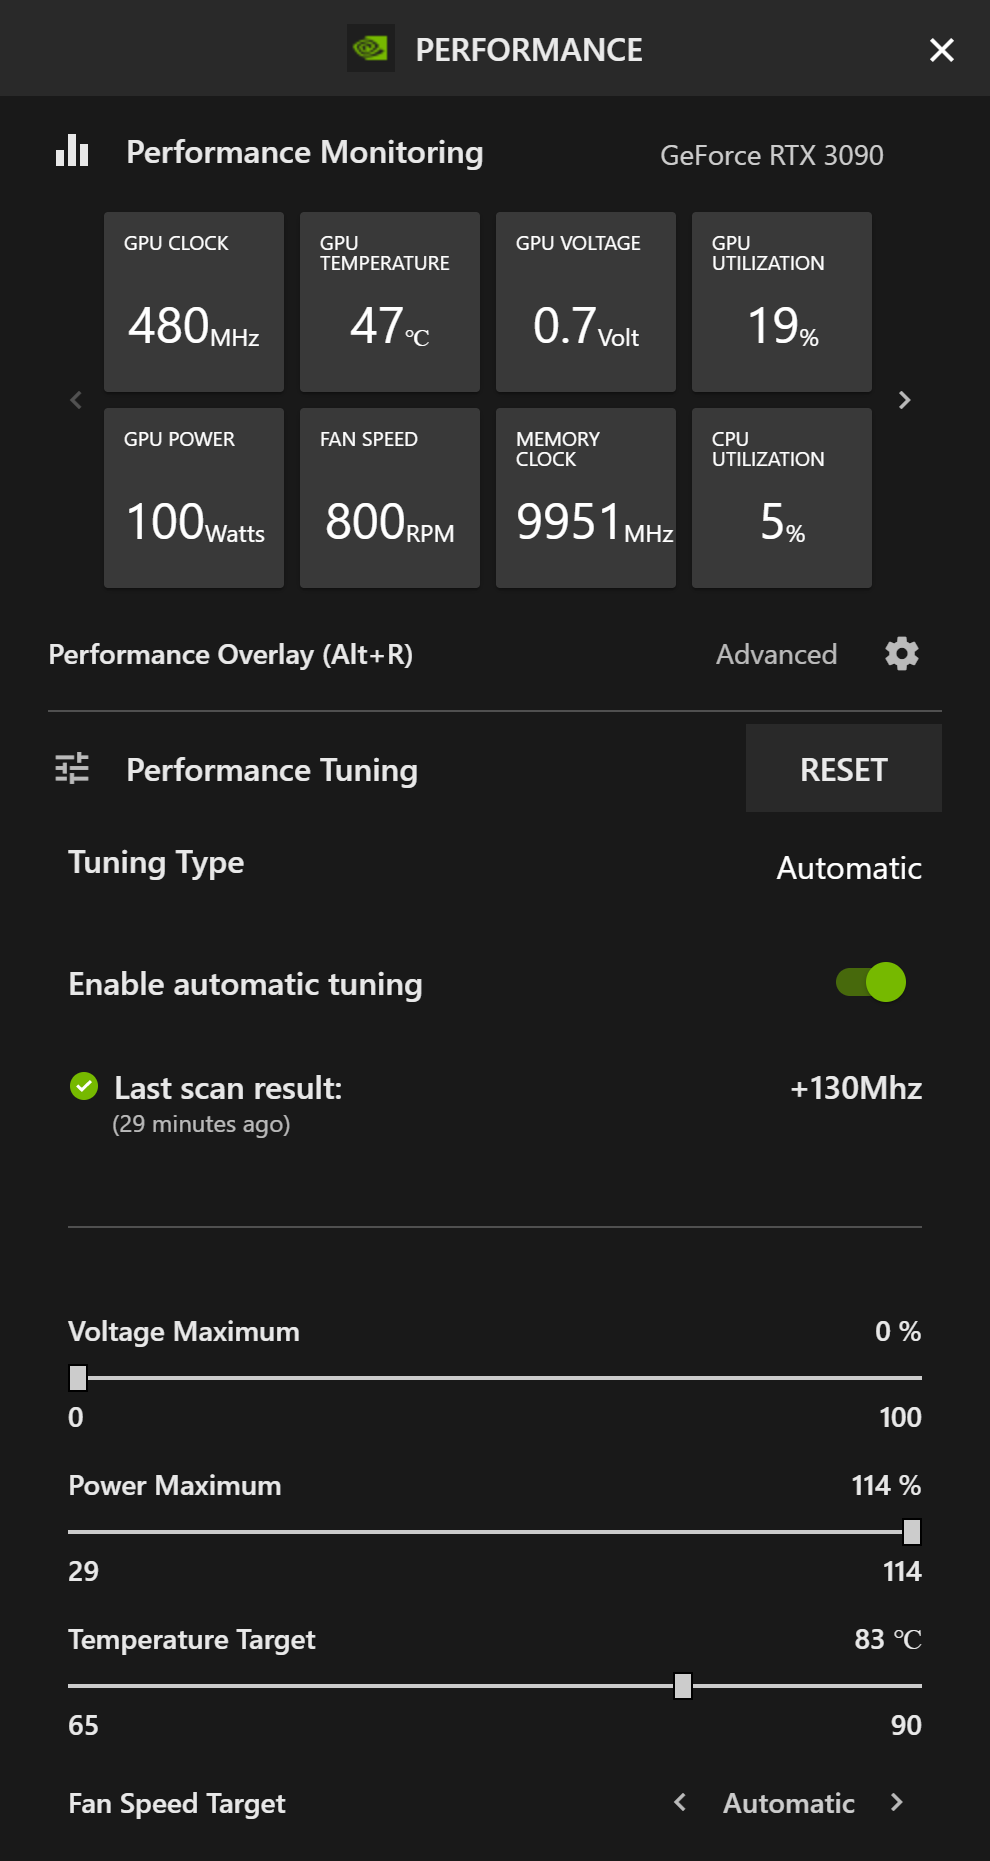 Optimize your Windows 10 game settings for maximum performance